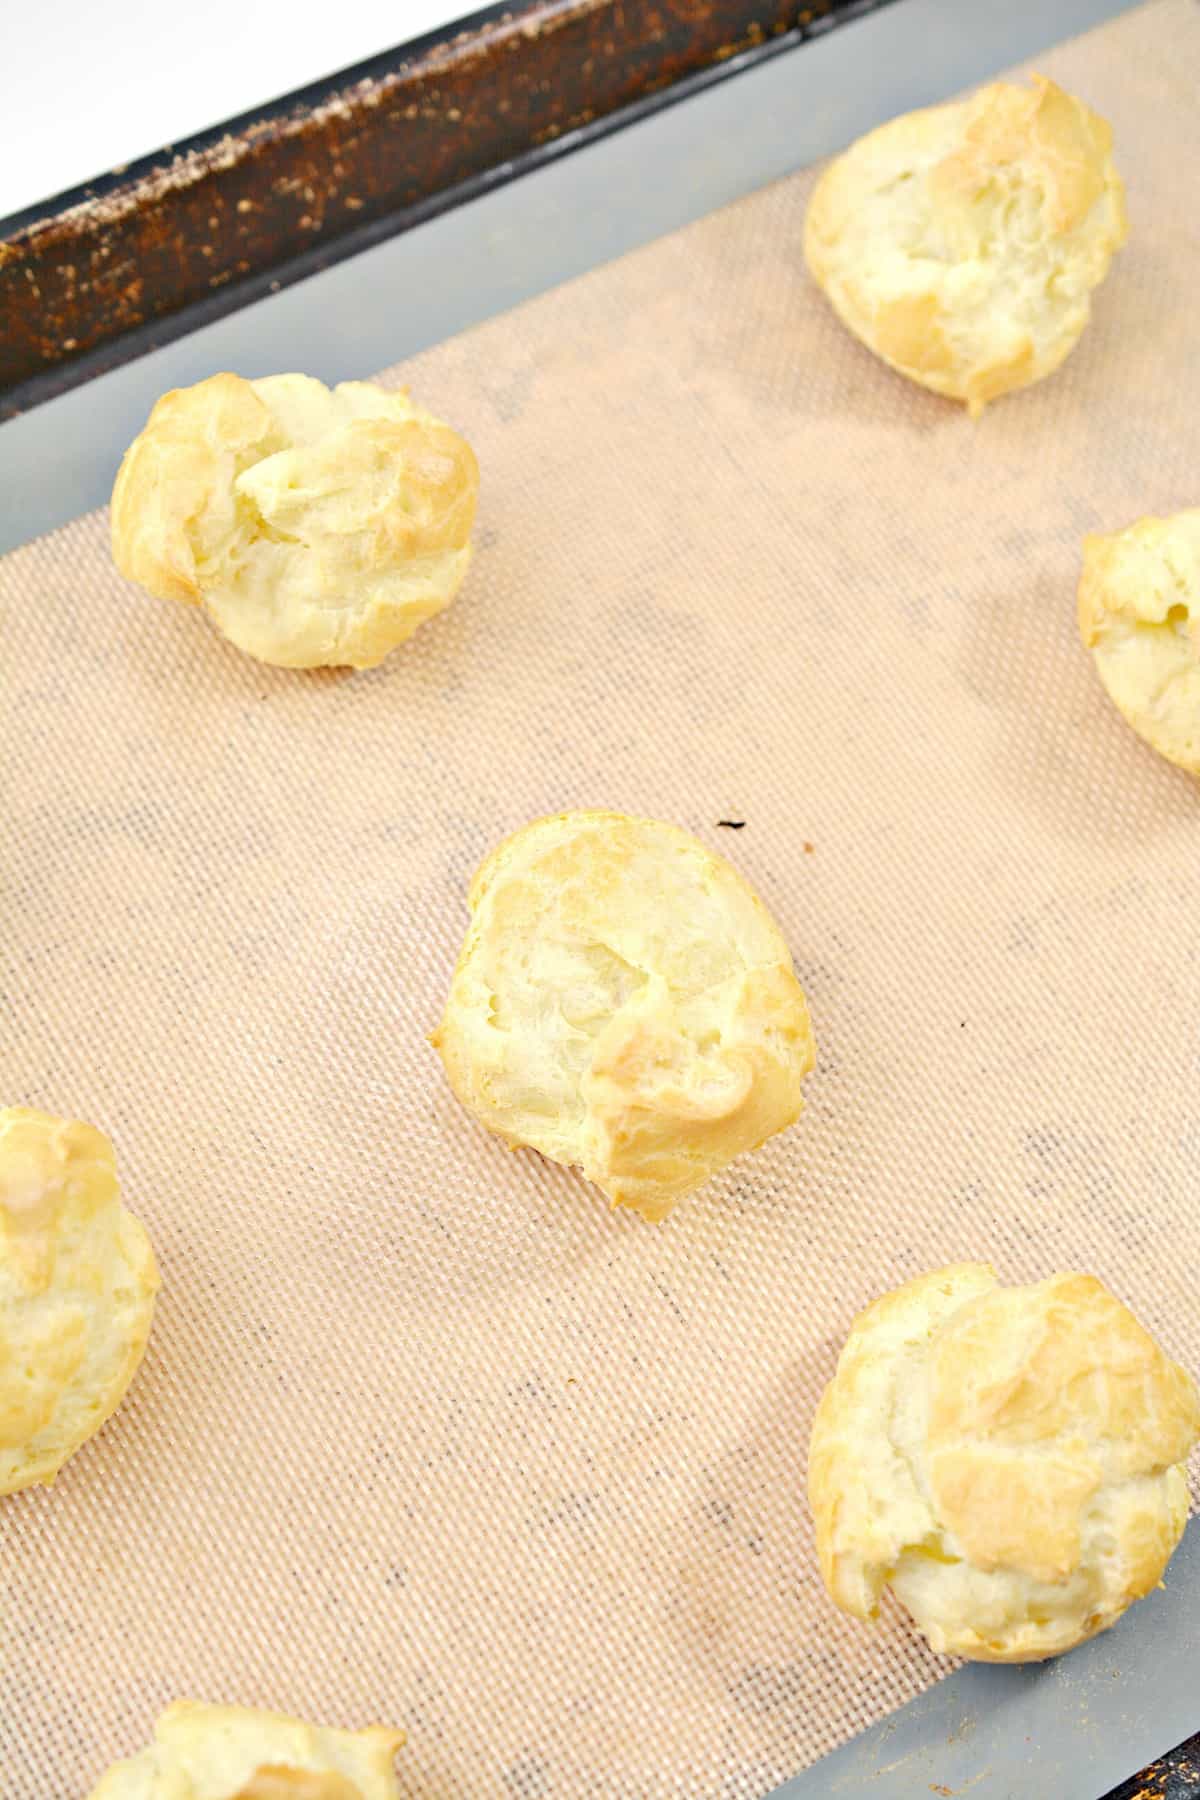 Use a cookie scoop or tablespoon to put drops of batter onto a parchment or silicone mat-lined baking sheet.